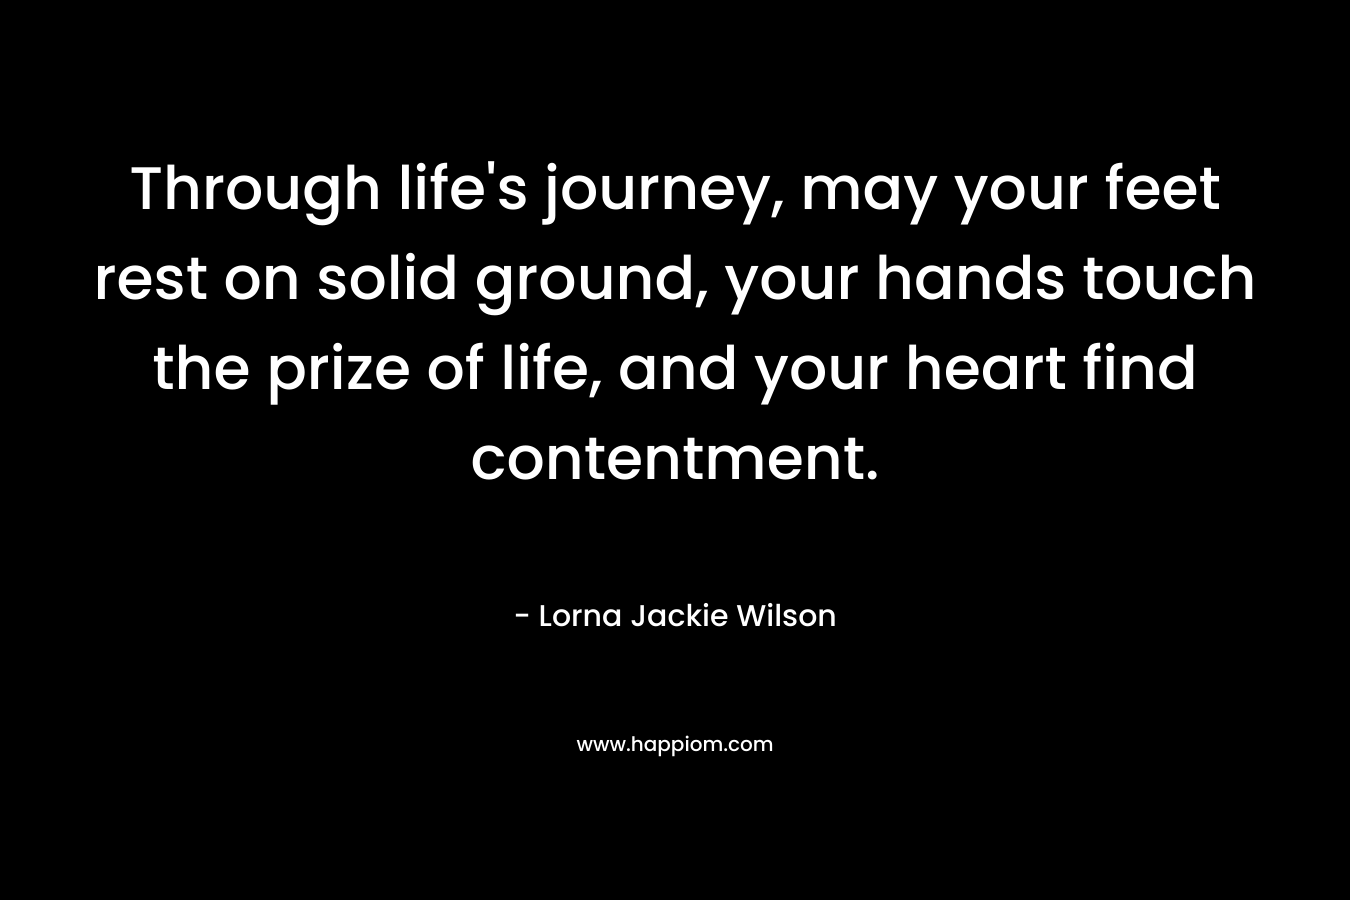 Through life’s journey, may your feet rest on solid ground, your hands touch the prize of life, and your heart find contentment. – Lorna Jackie Wilson